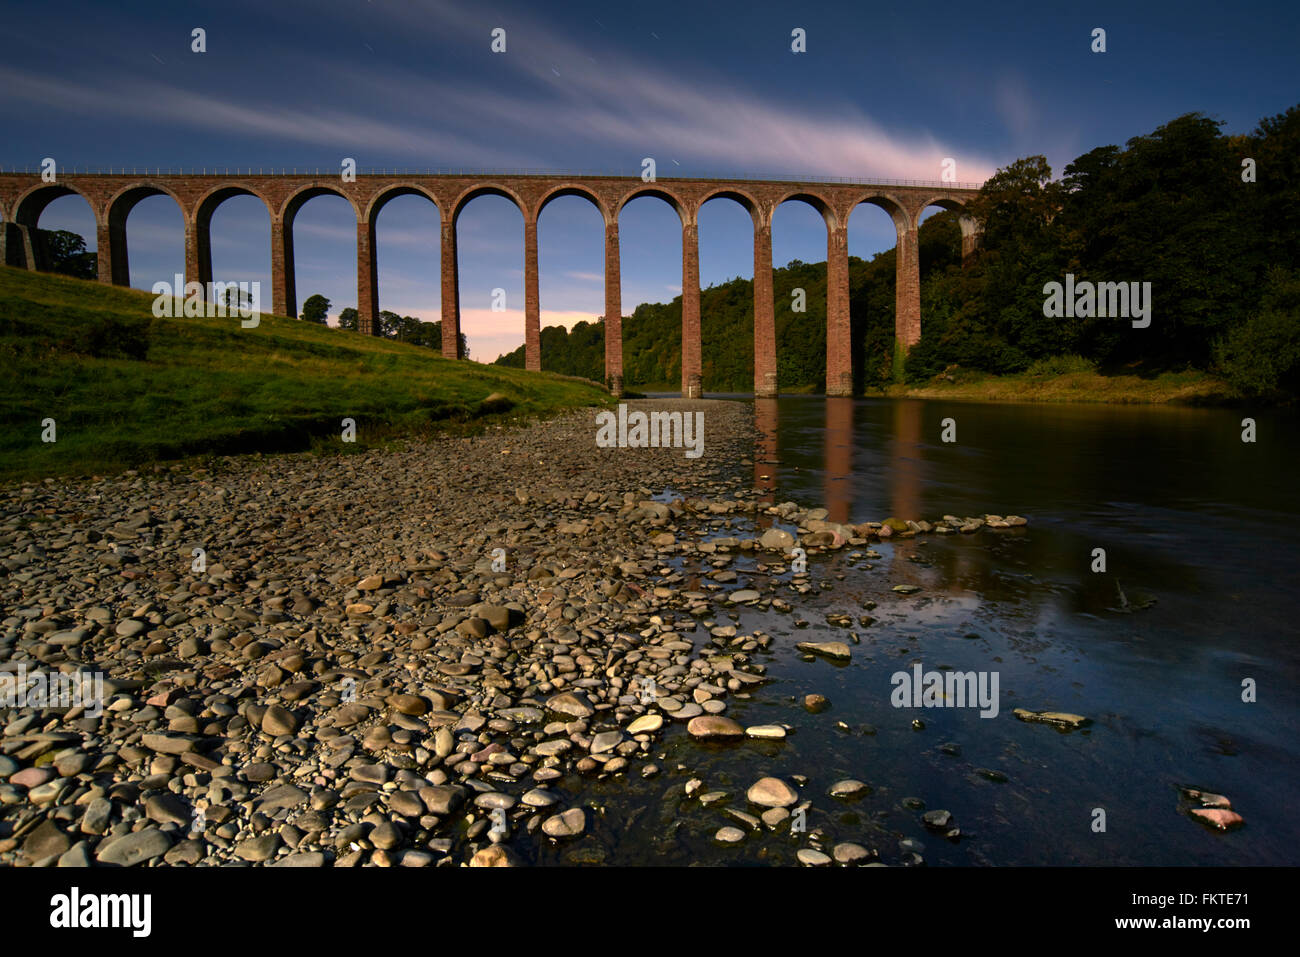 Leaderfoot Viaduct by the light of a super moon. Used as movie location on Indiana Jones 5. Stock Photo